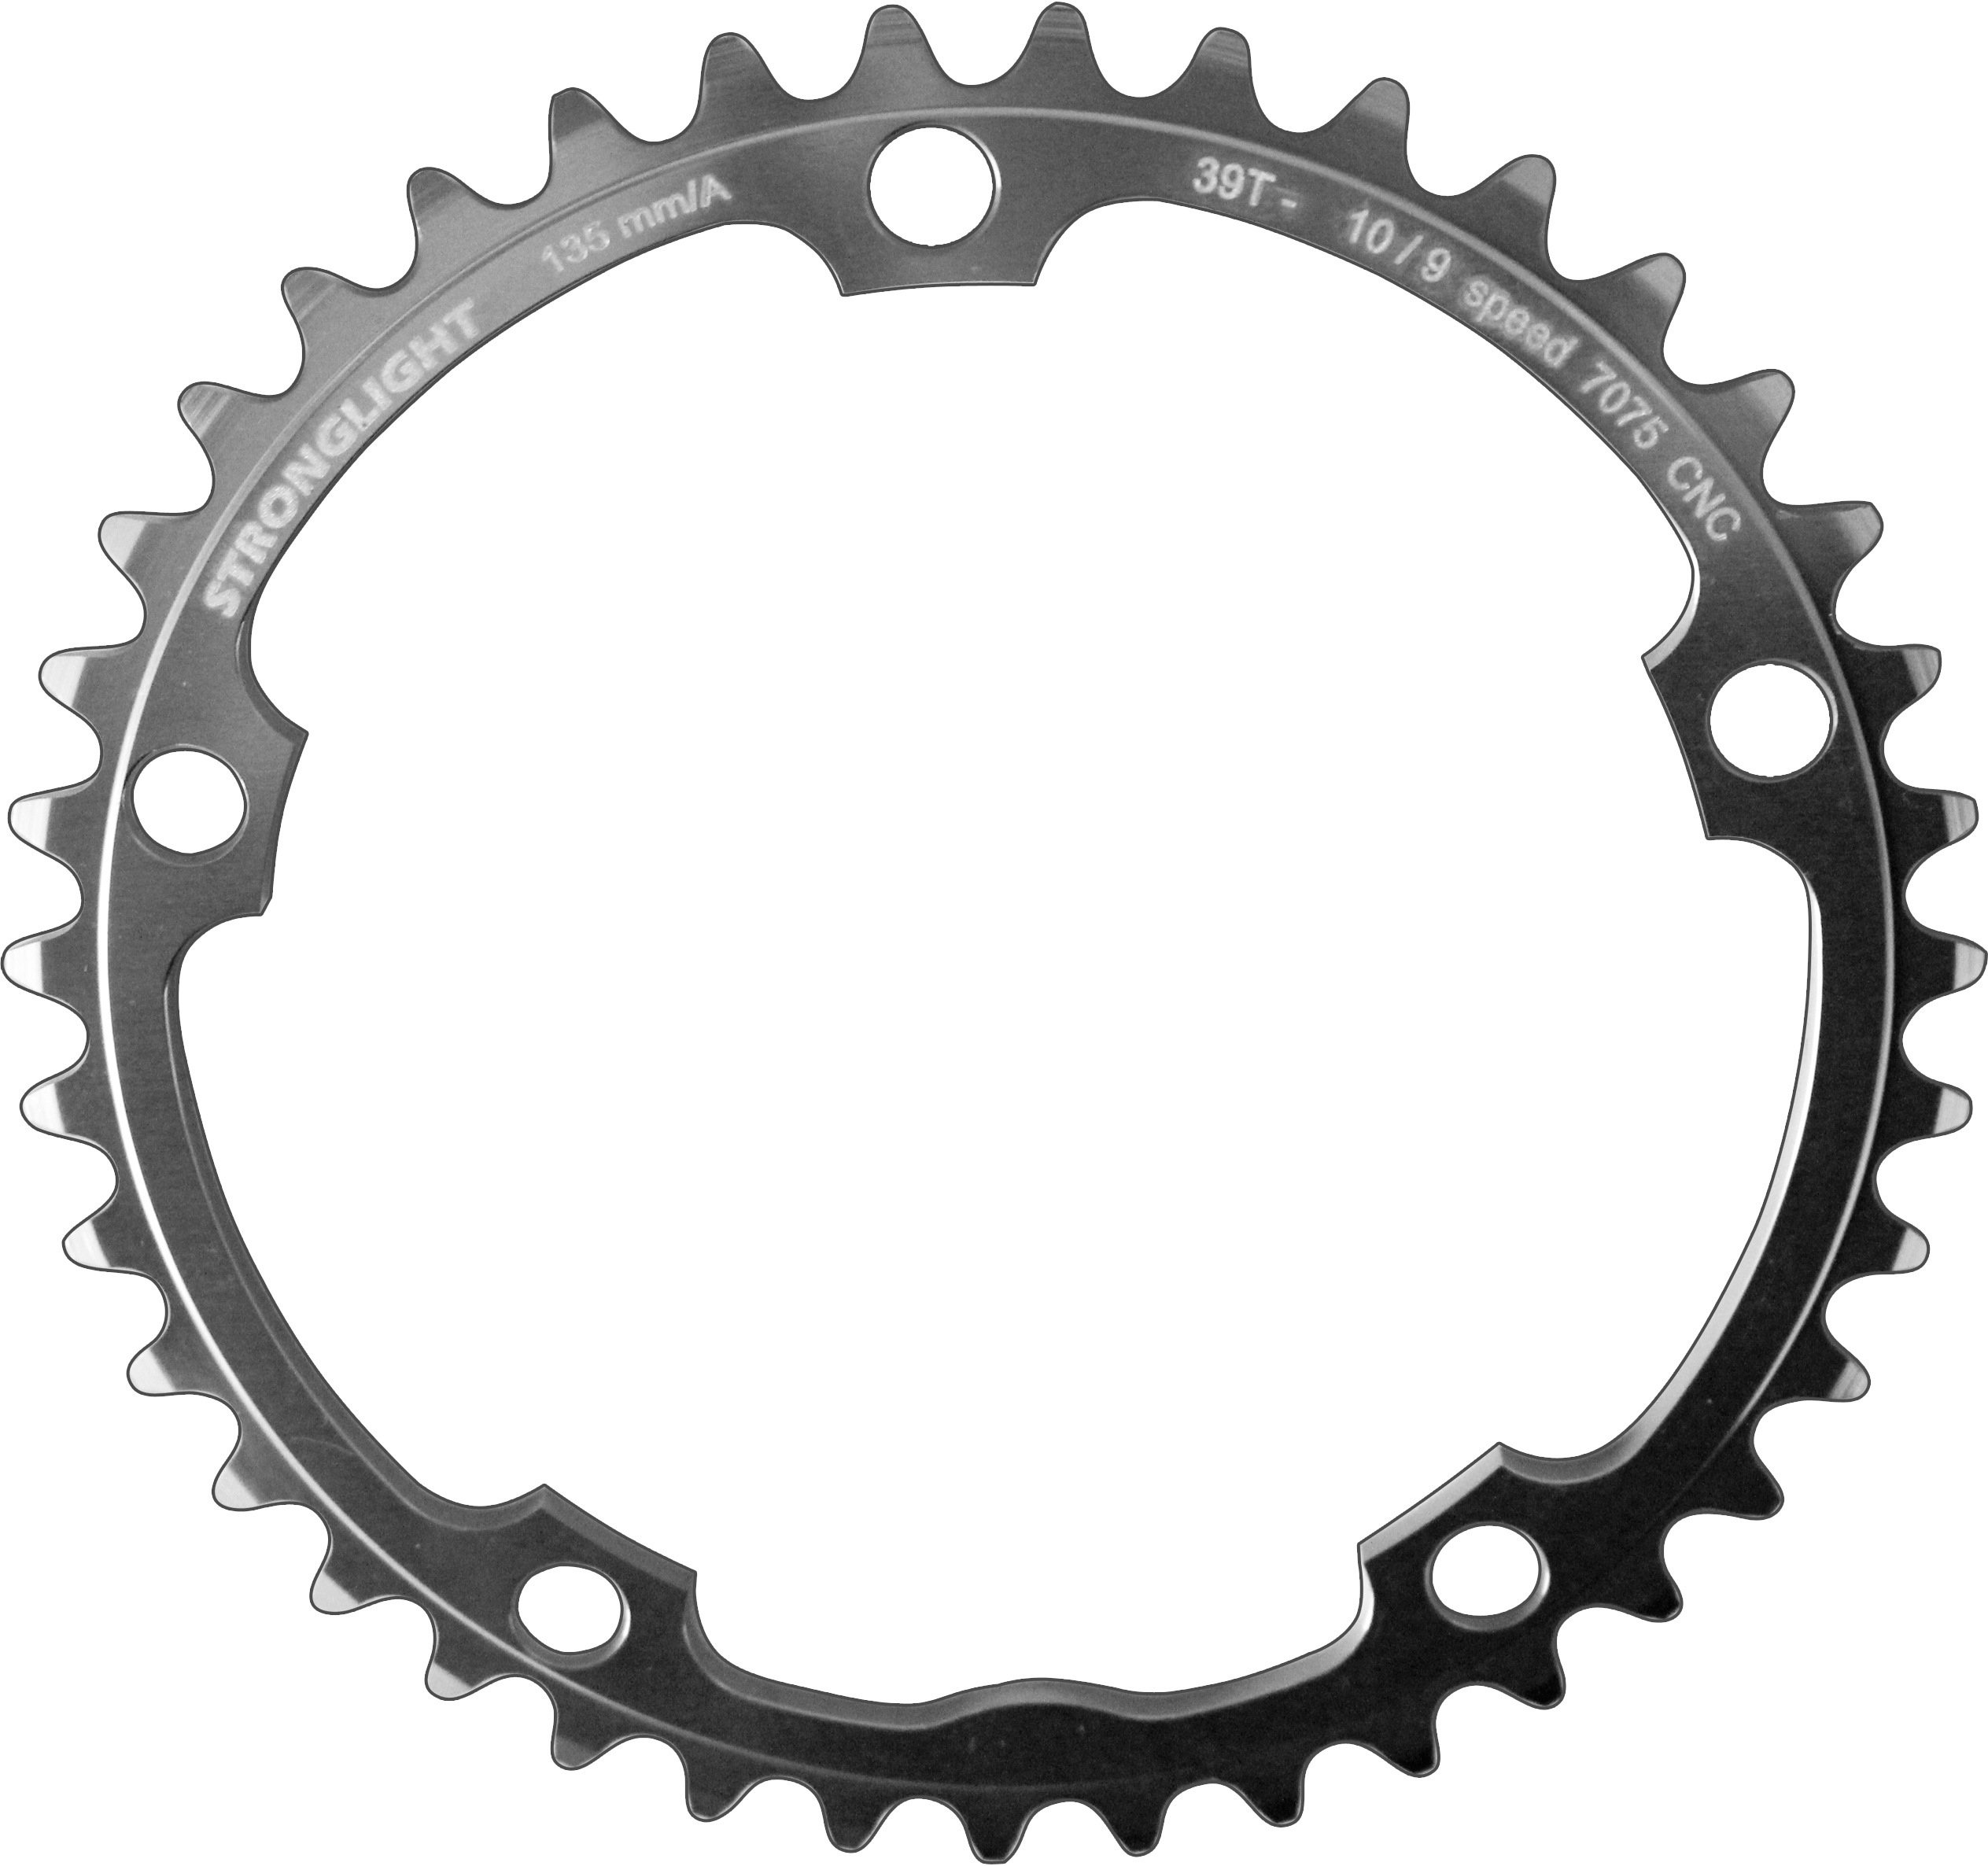 RZA135S46 Stronglight 46T 5-Arm/135mm Chainring